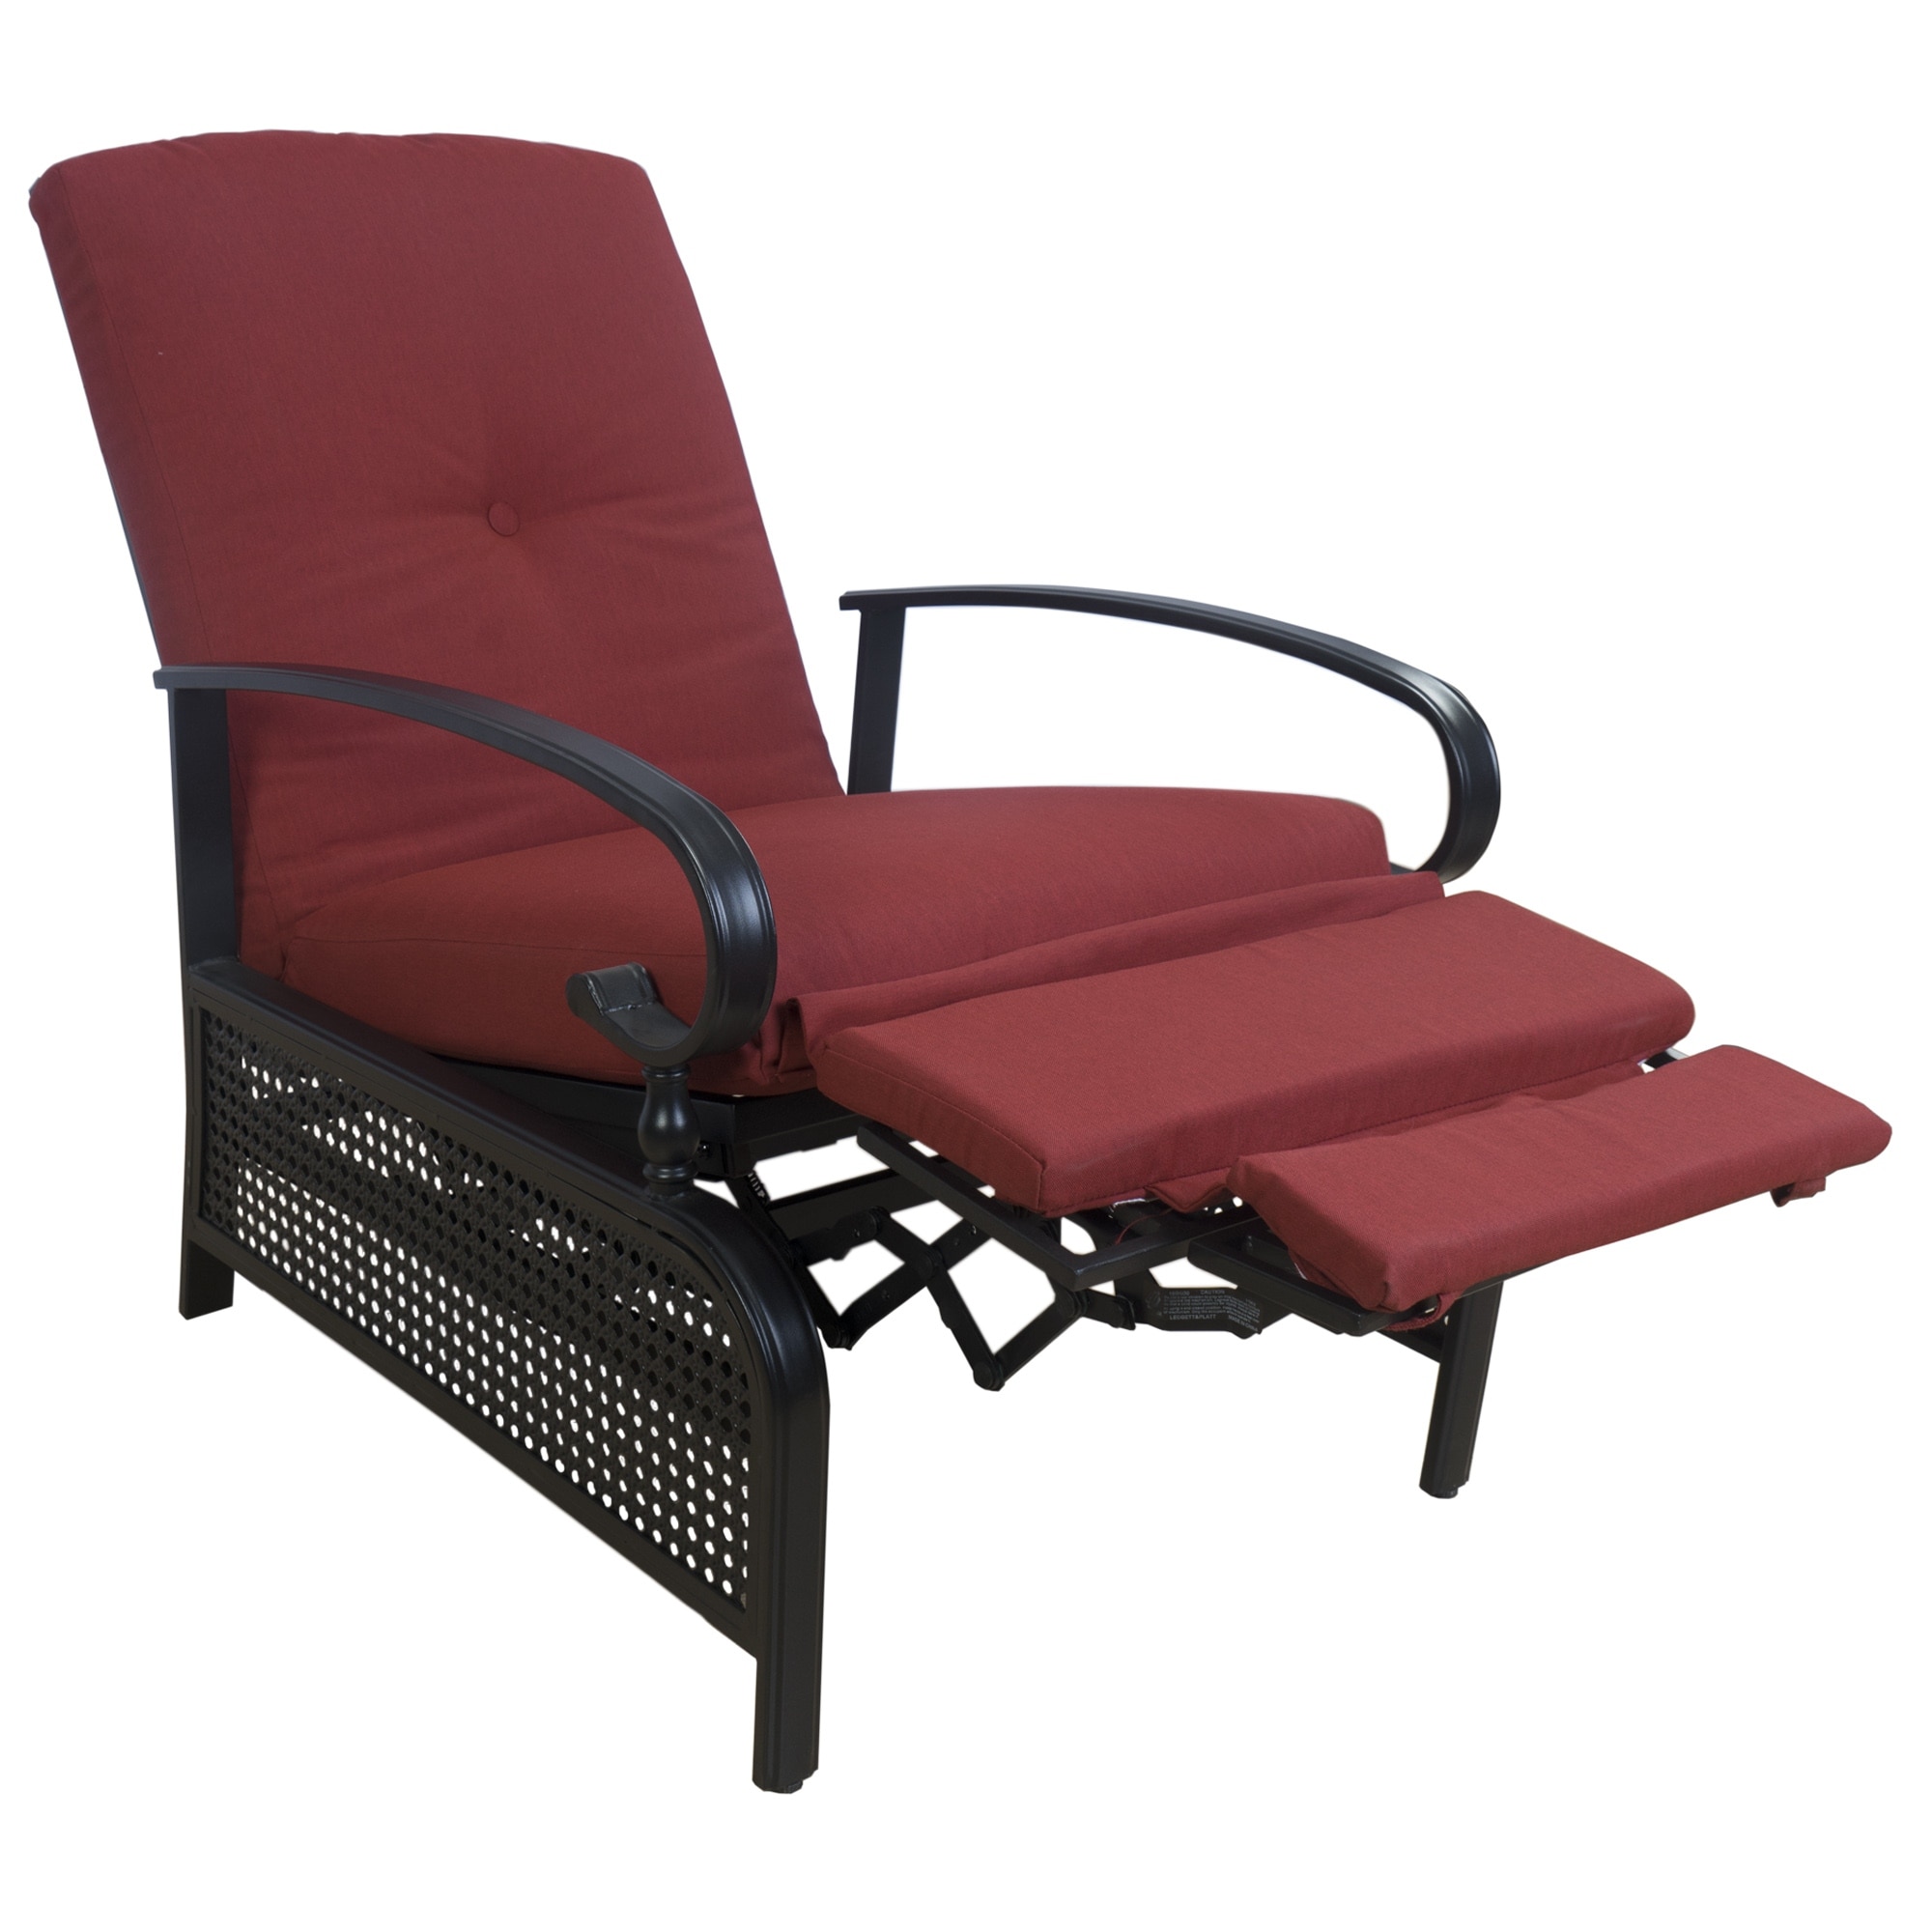 https://ak1.ostkcdn.com/images/products/is/images/direct/7385bcb62ef4028de1f4ae2dd6defc0d78d78741/Kozyard-Adjustable-Patio-Reclining-Lounge-Chair-with-Strong-Extendable-Metal-Frame-and-Removable-Cushions.jpg